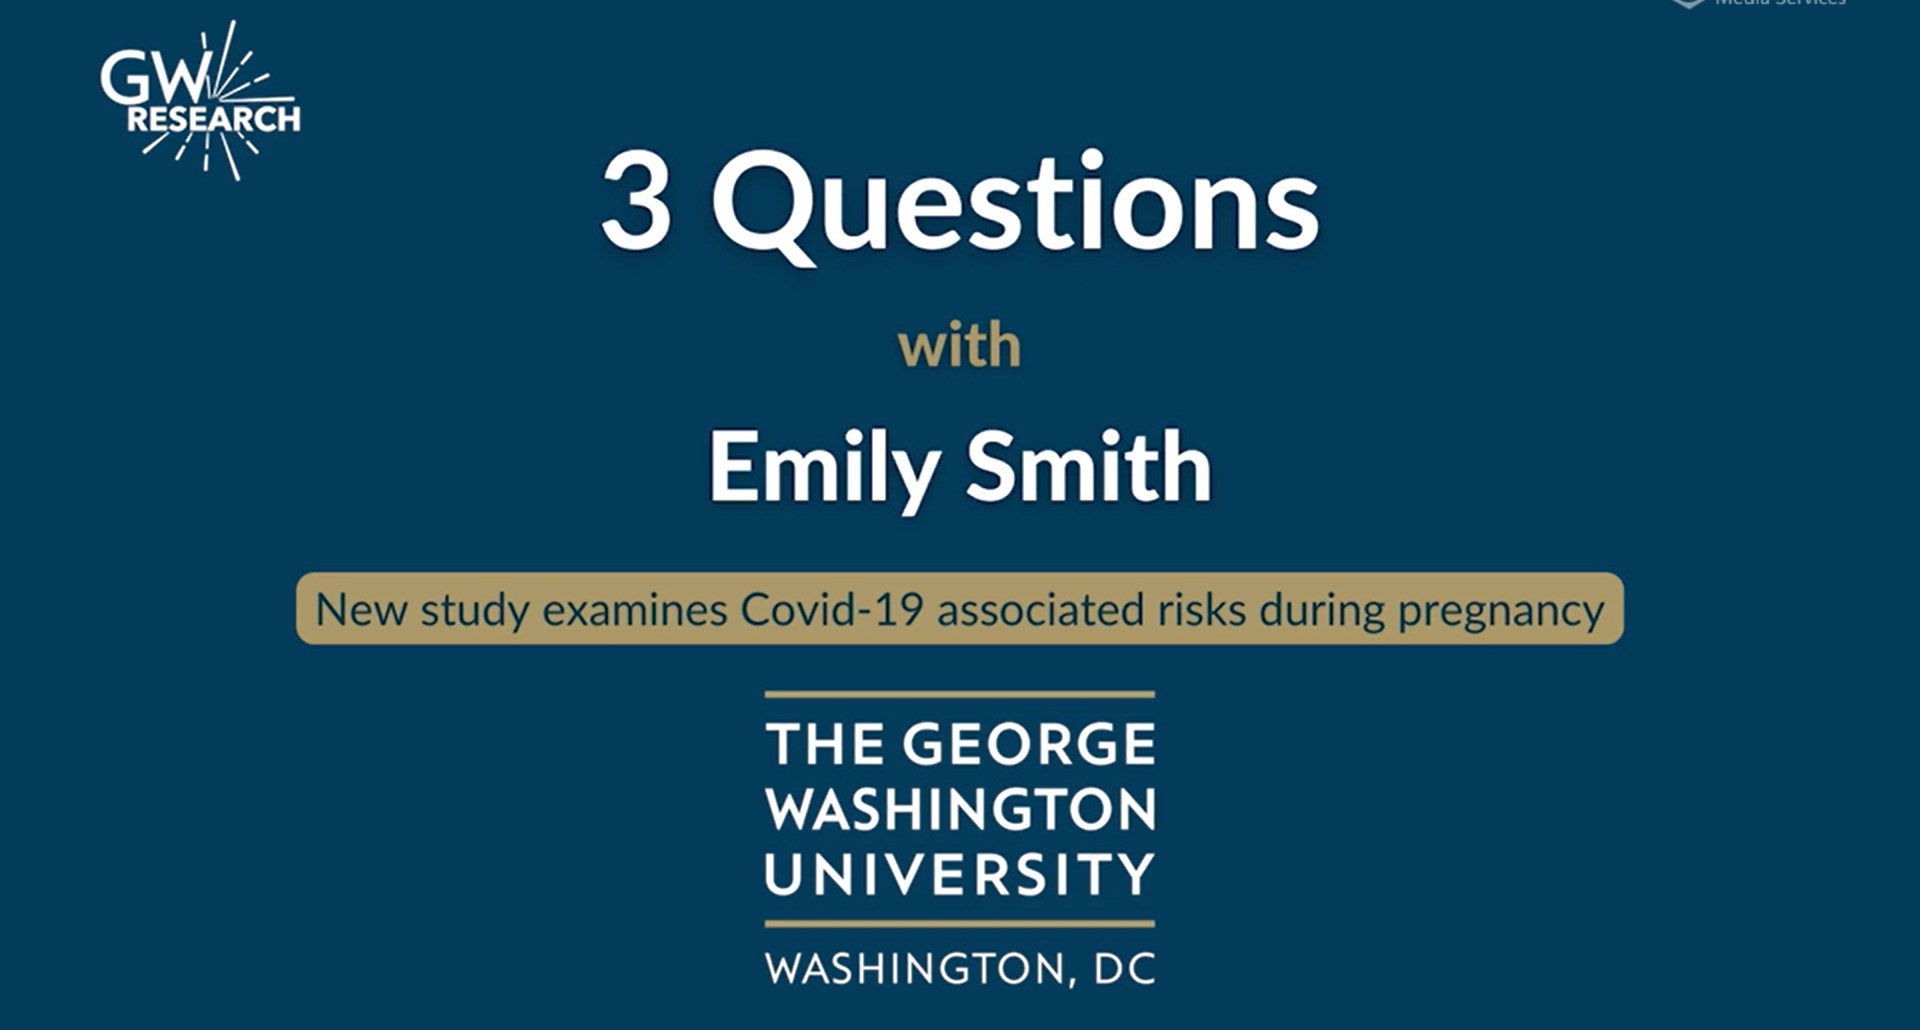 3 Questions with Emily Smith